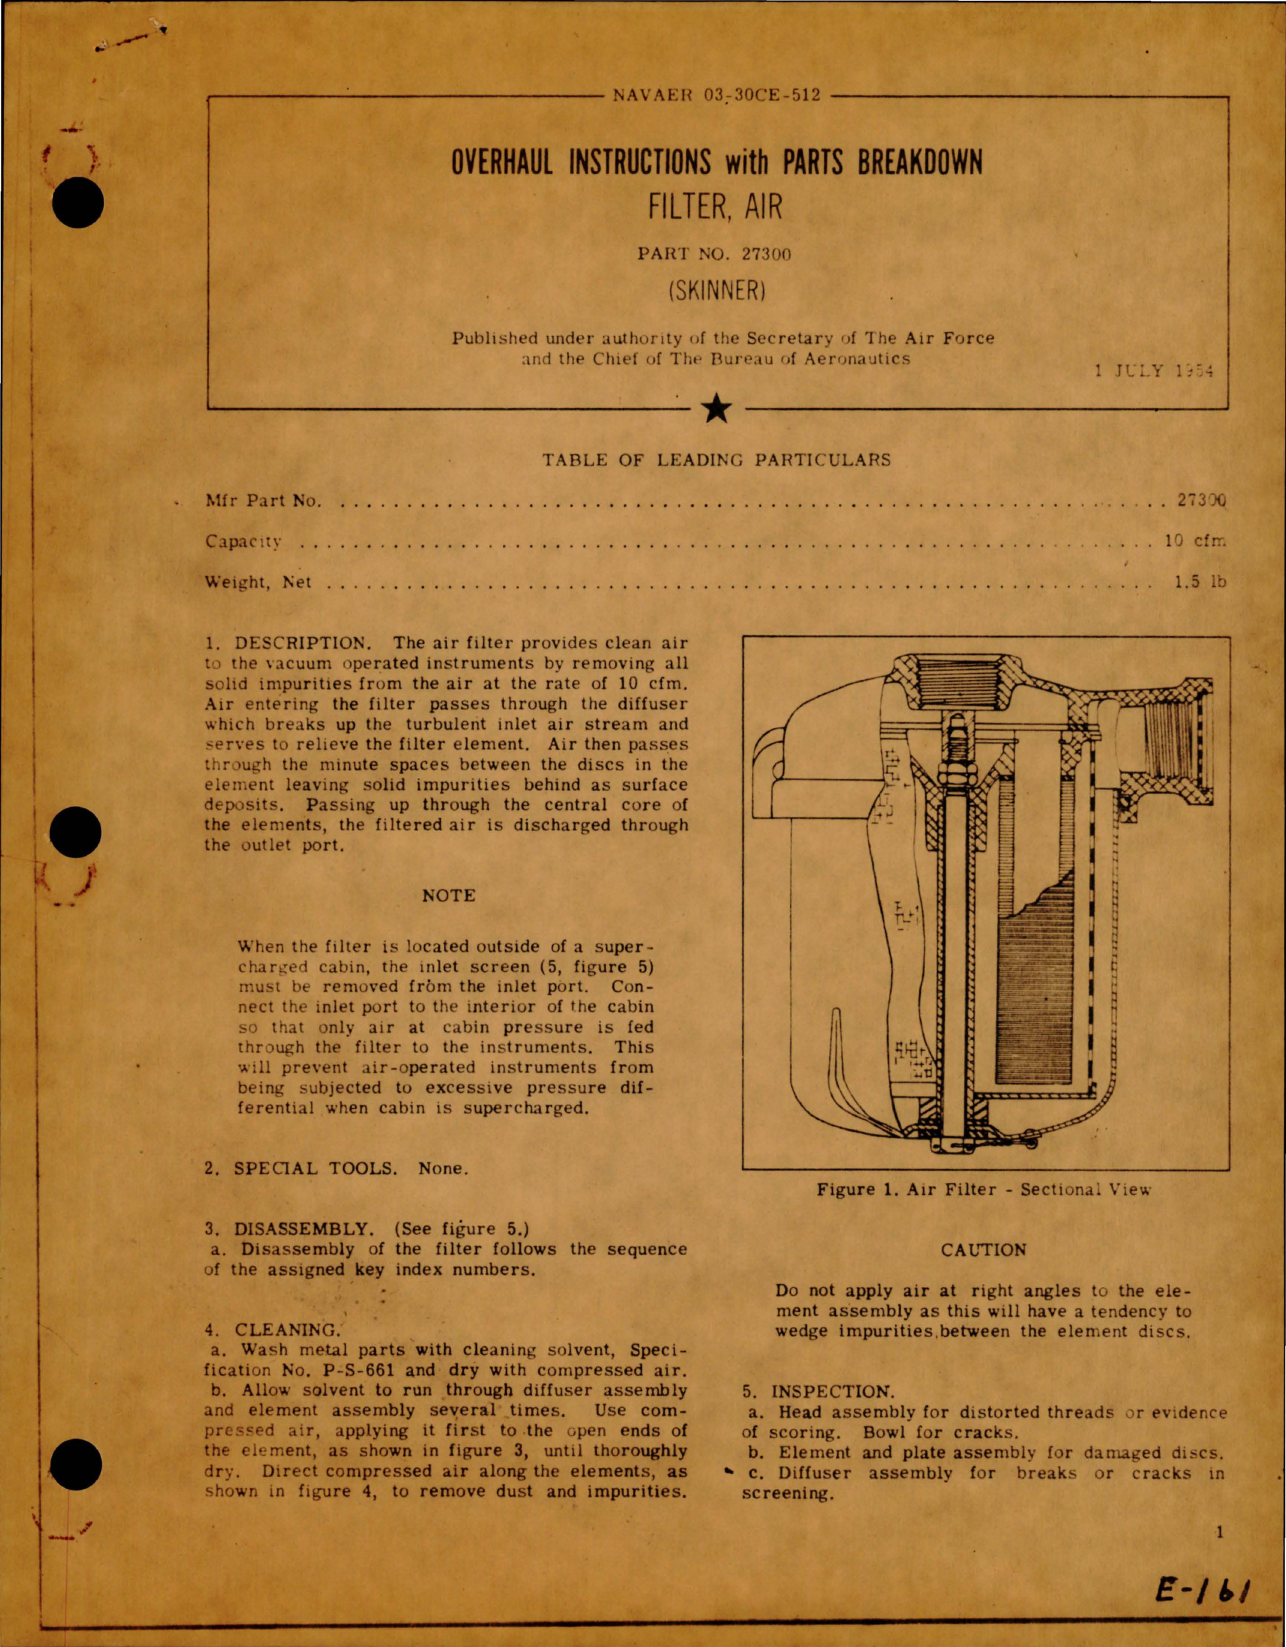 Sample page 1 from AirCorps Library document: Overhaul Instructions w Parts Breakdown for Air Filter - Part 27300 